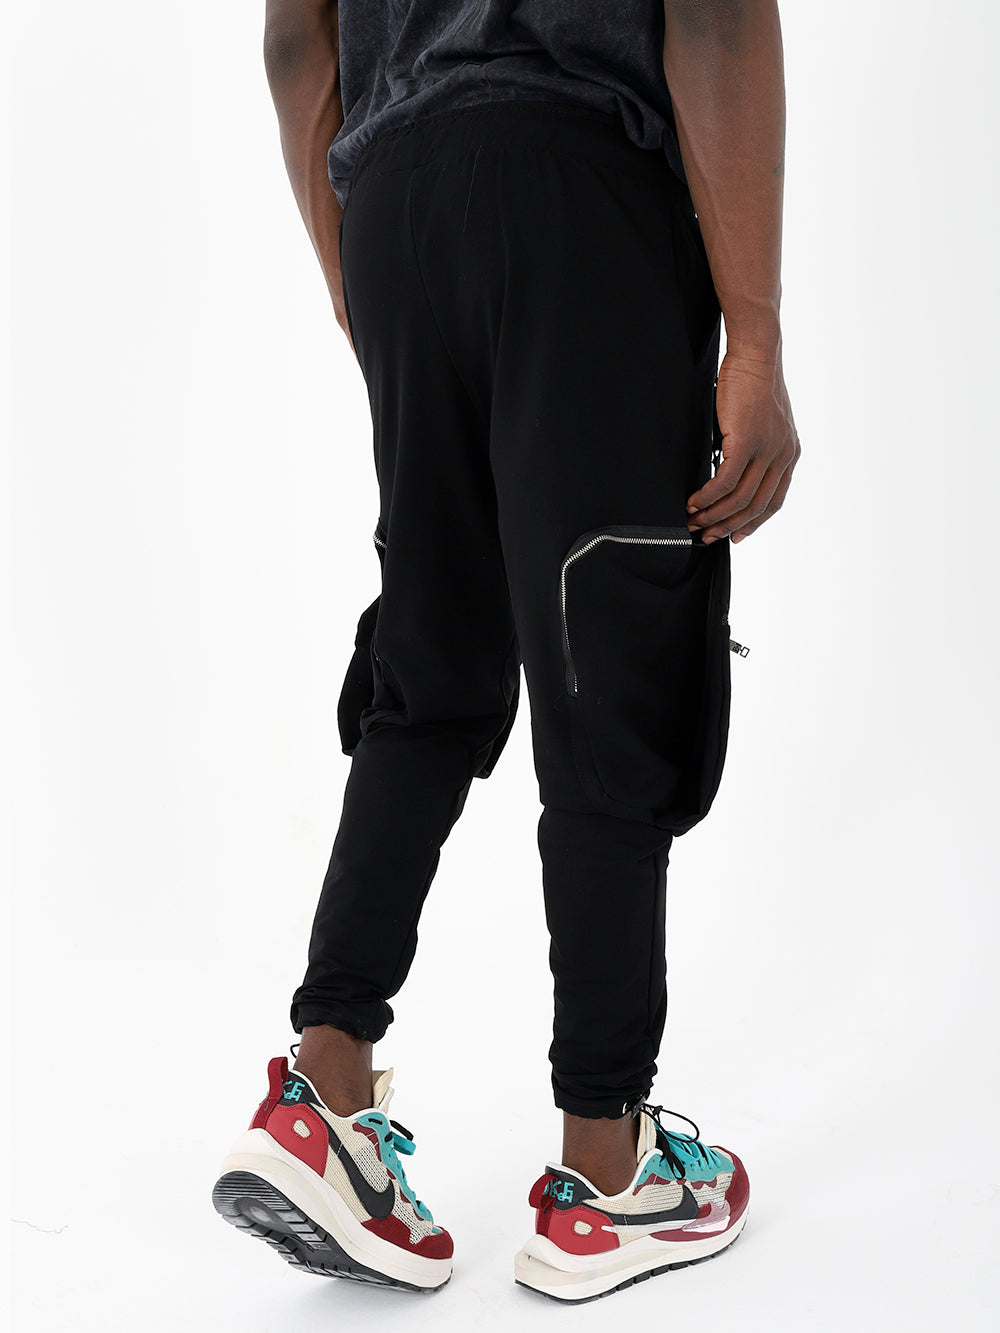 The stylish back of a man wearing comfortable black GALAXY joggers and sneakers.